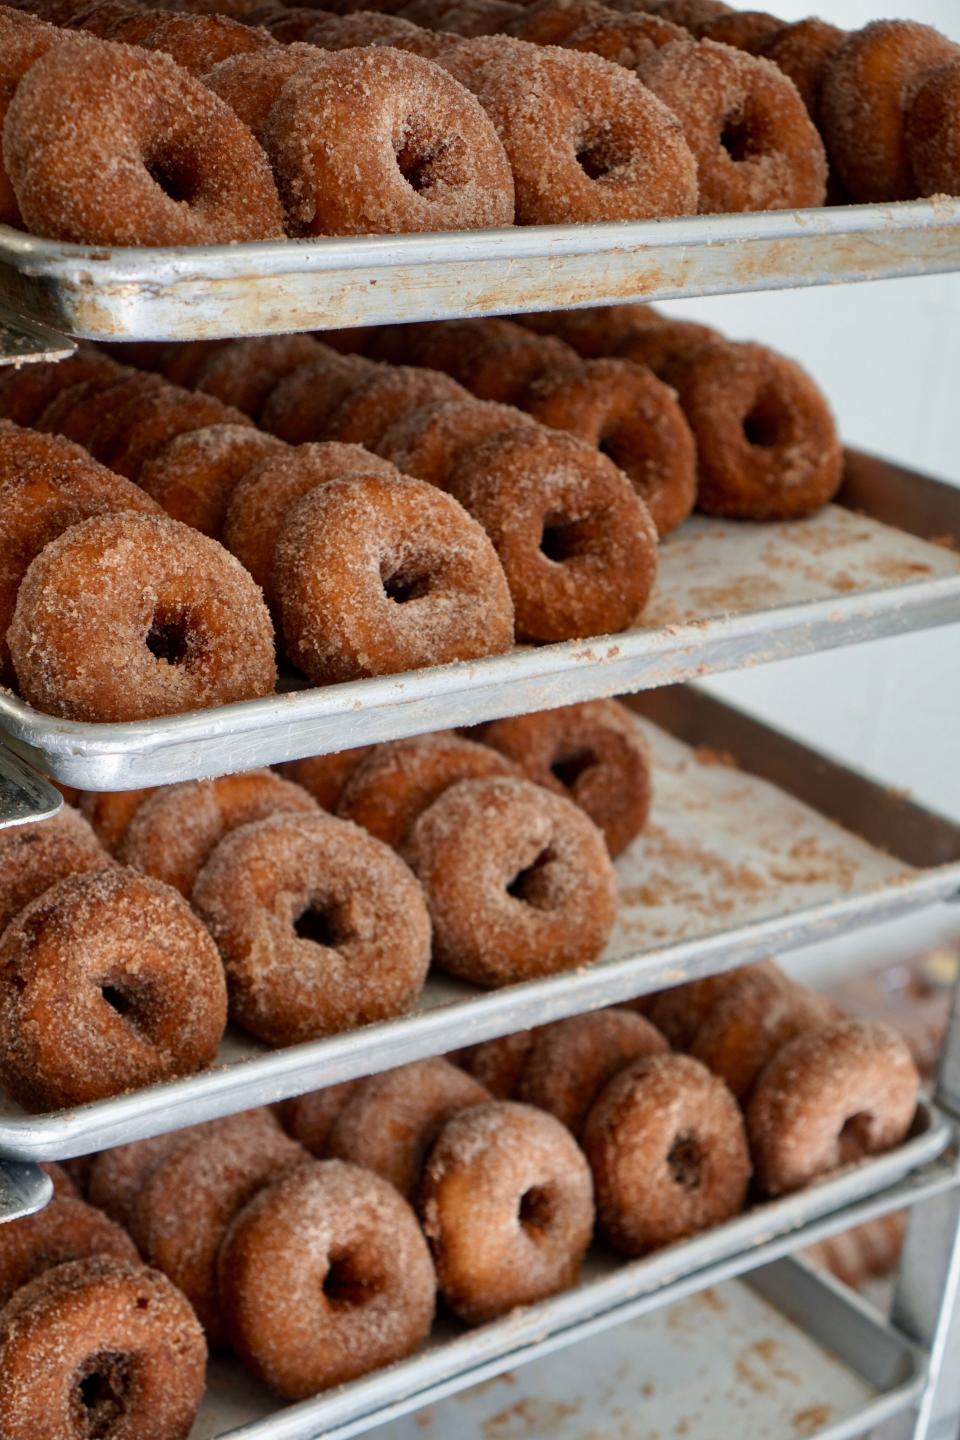 In addition to sweet and hard apple ciders, apple cider doughnuts are a seasonal favorite at Barton Orchards in Poughquag.